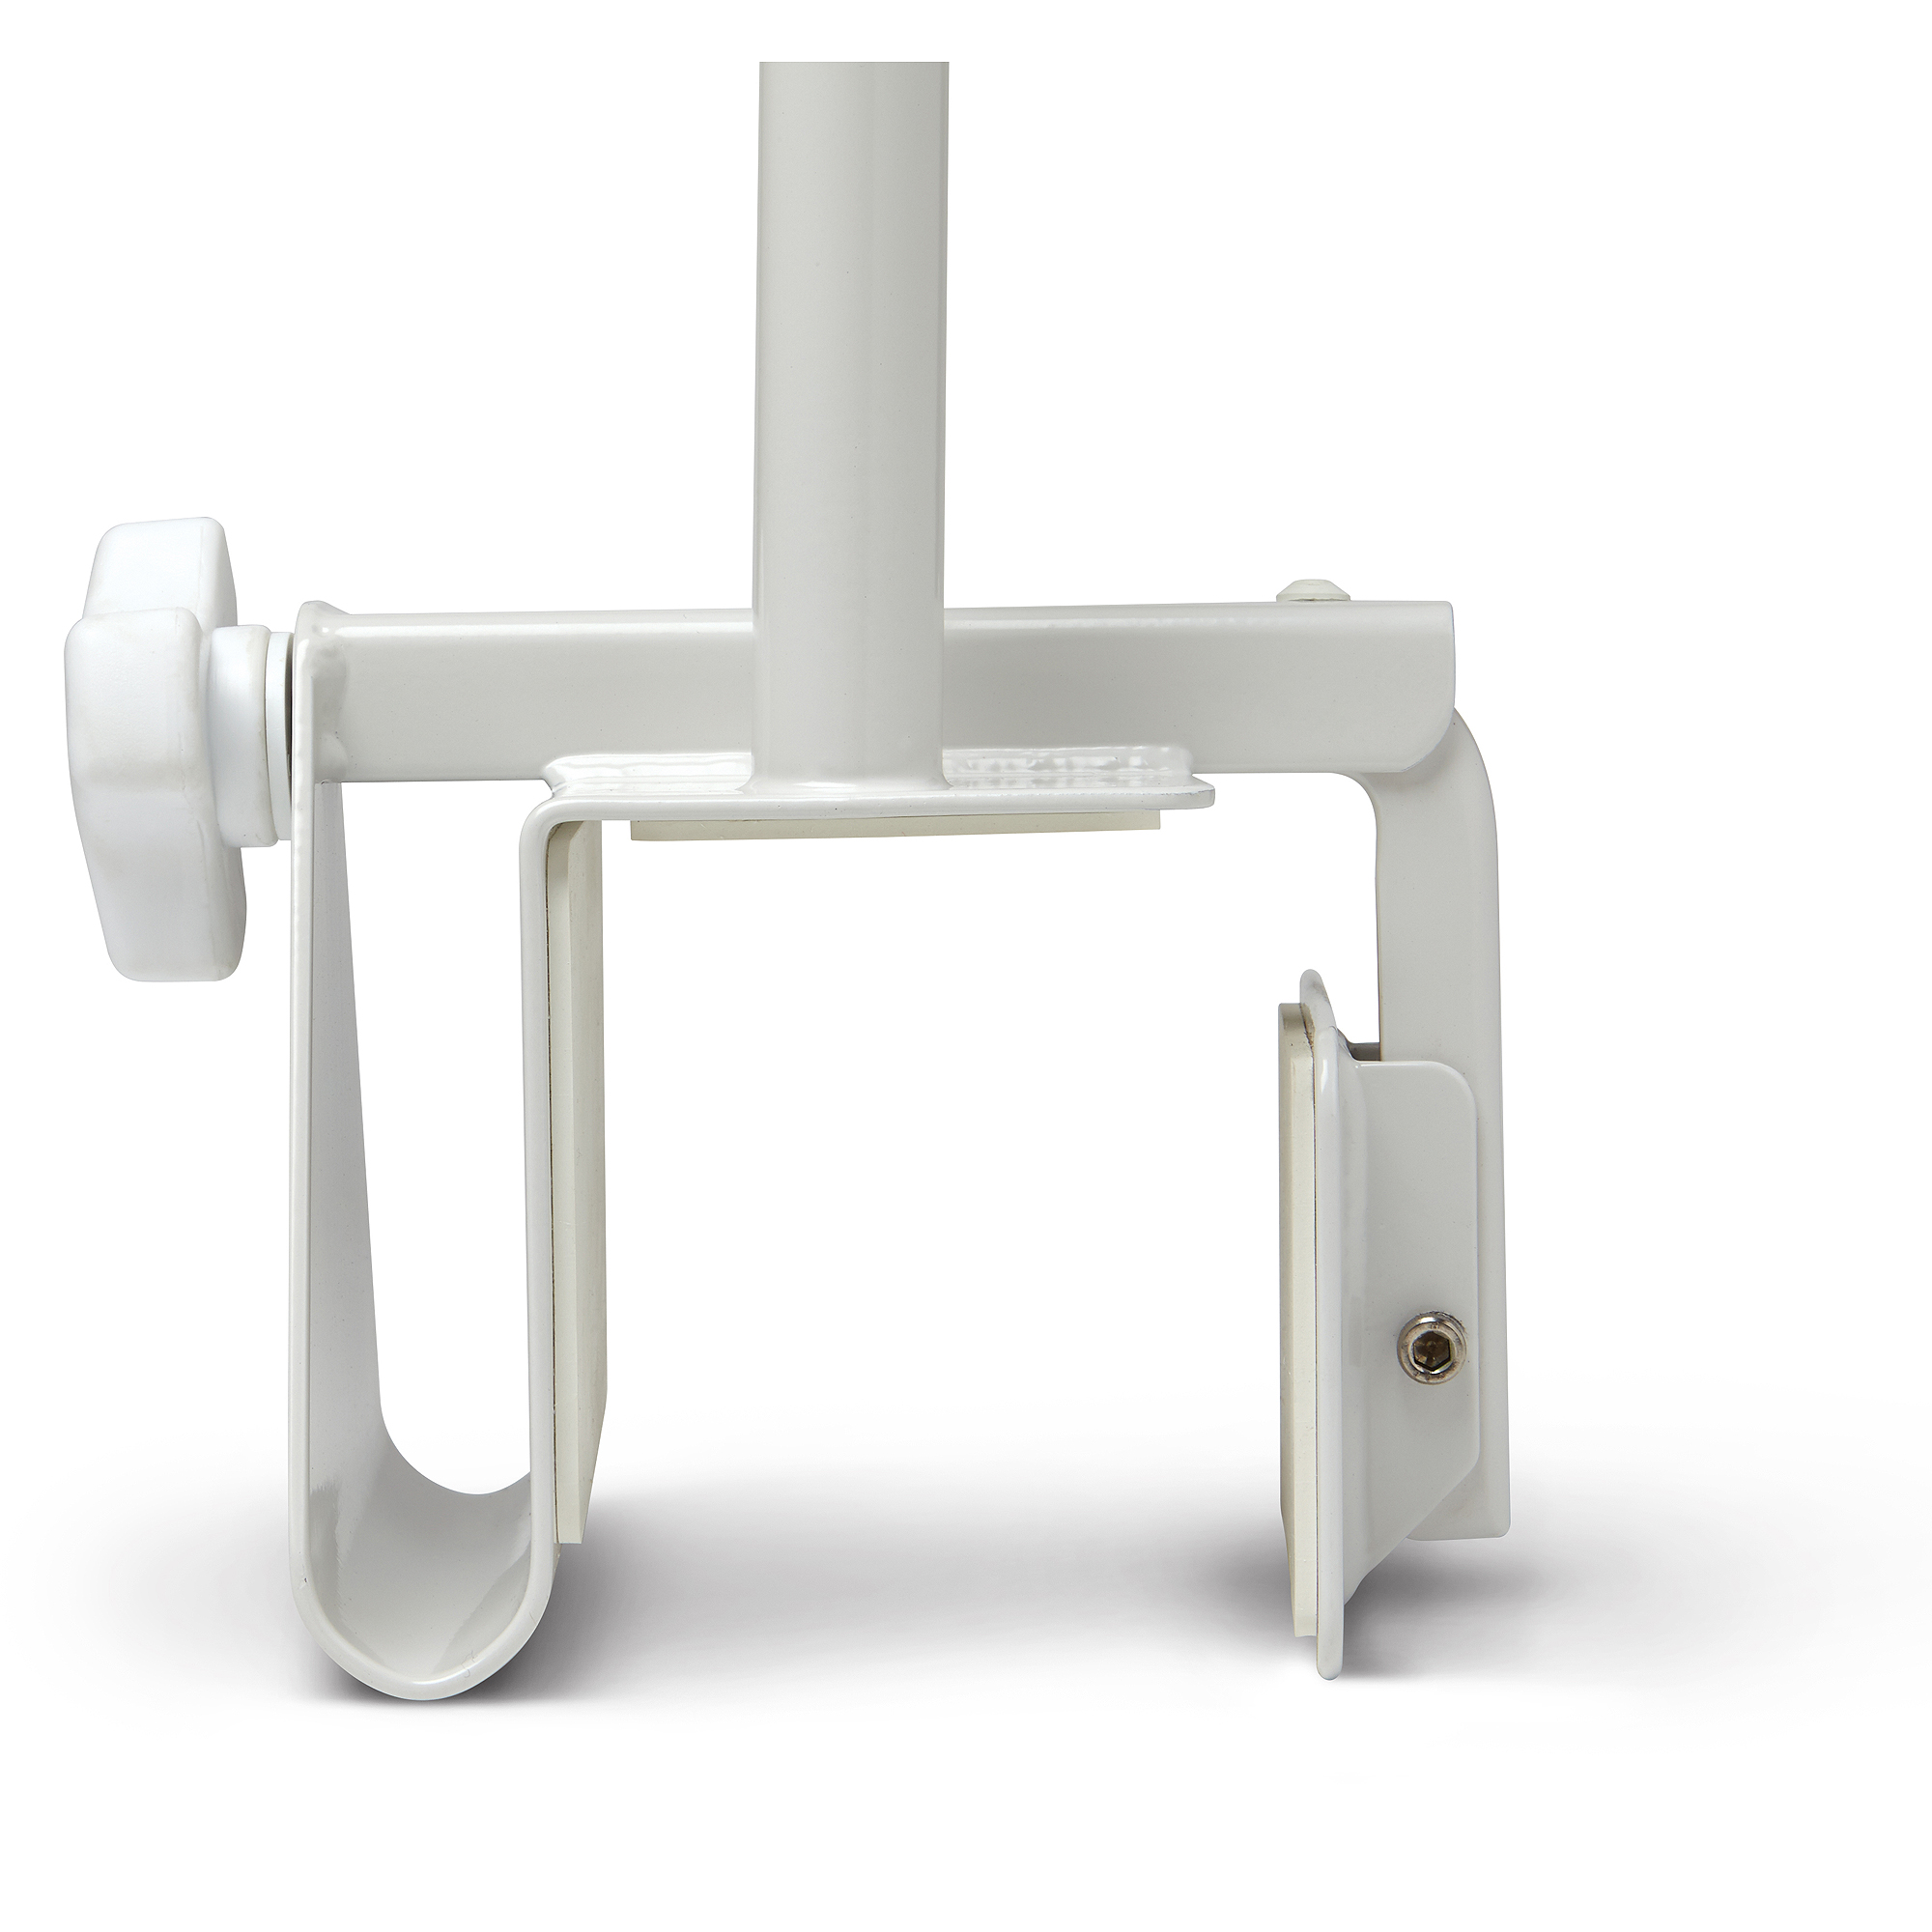 Medline Bath Tub Support Bar, Rail Grips Bathtubs Up To 6" Wide, 250 lb Weight Capacity, White - image 3 of 5